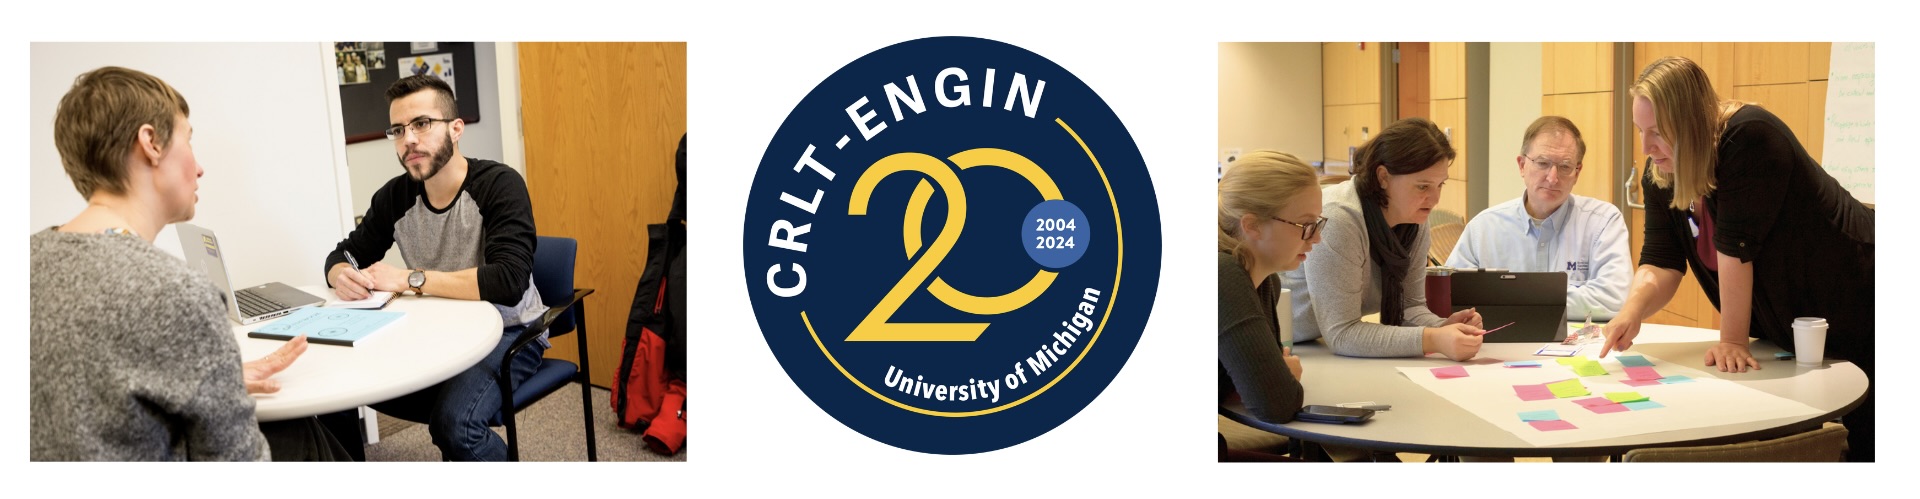 Image 1: CRLT-Engin Consultant meets with a student instructor; Image 2: CRLT-Engin 20th Anniversary Logo; Image 3: Michigan Engineering Instructors connect during a workshop